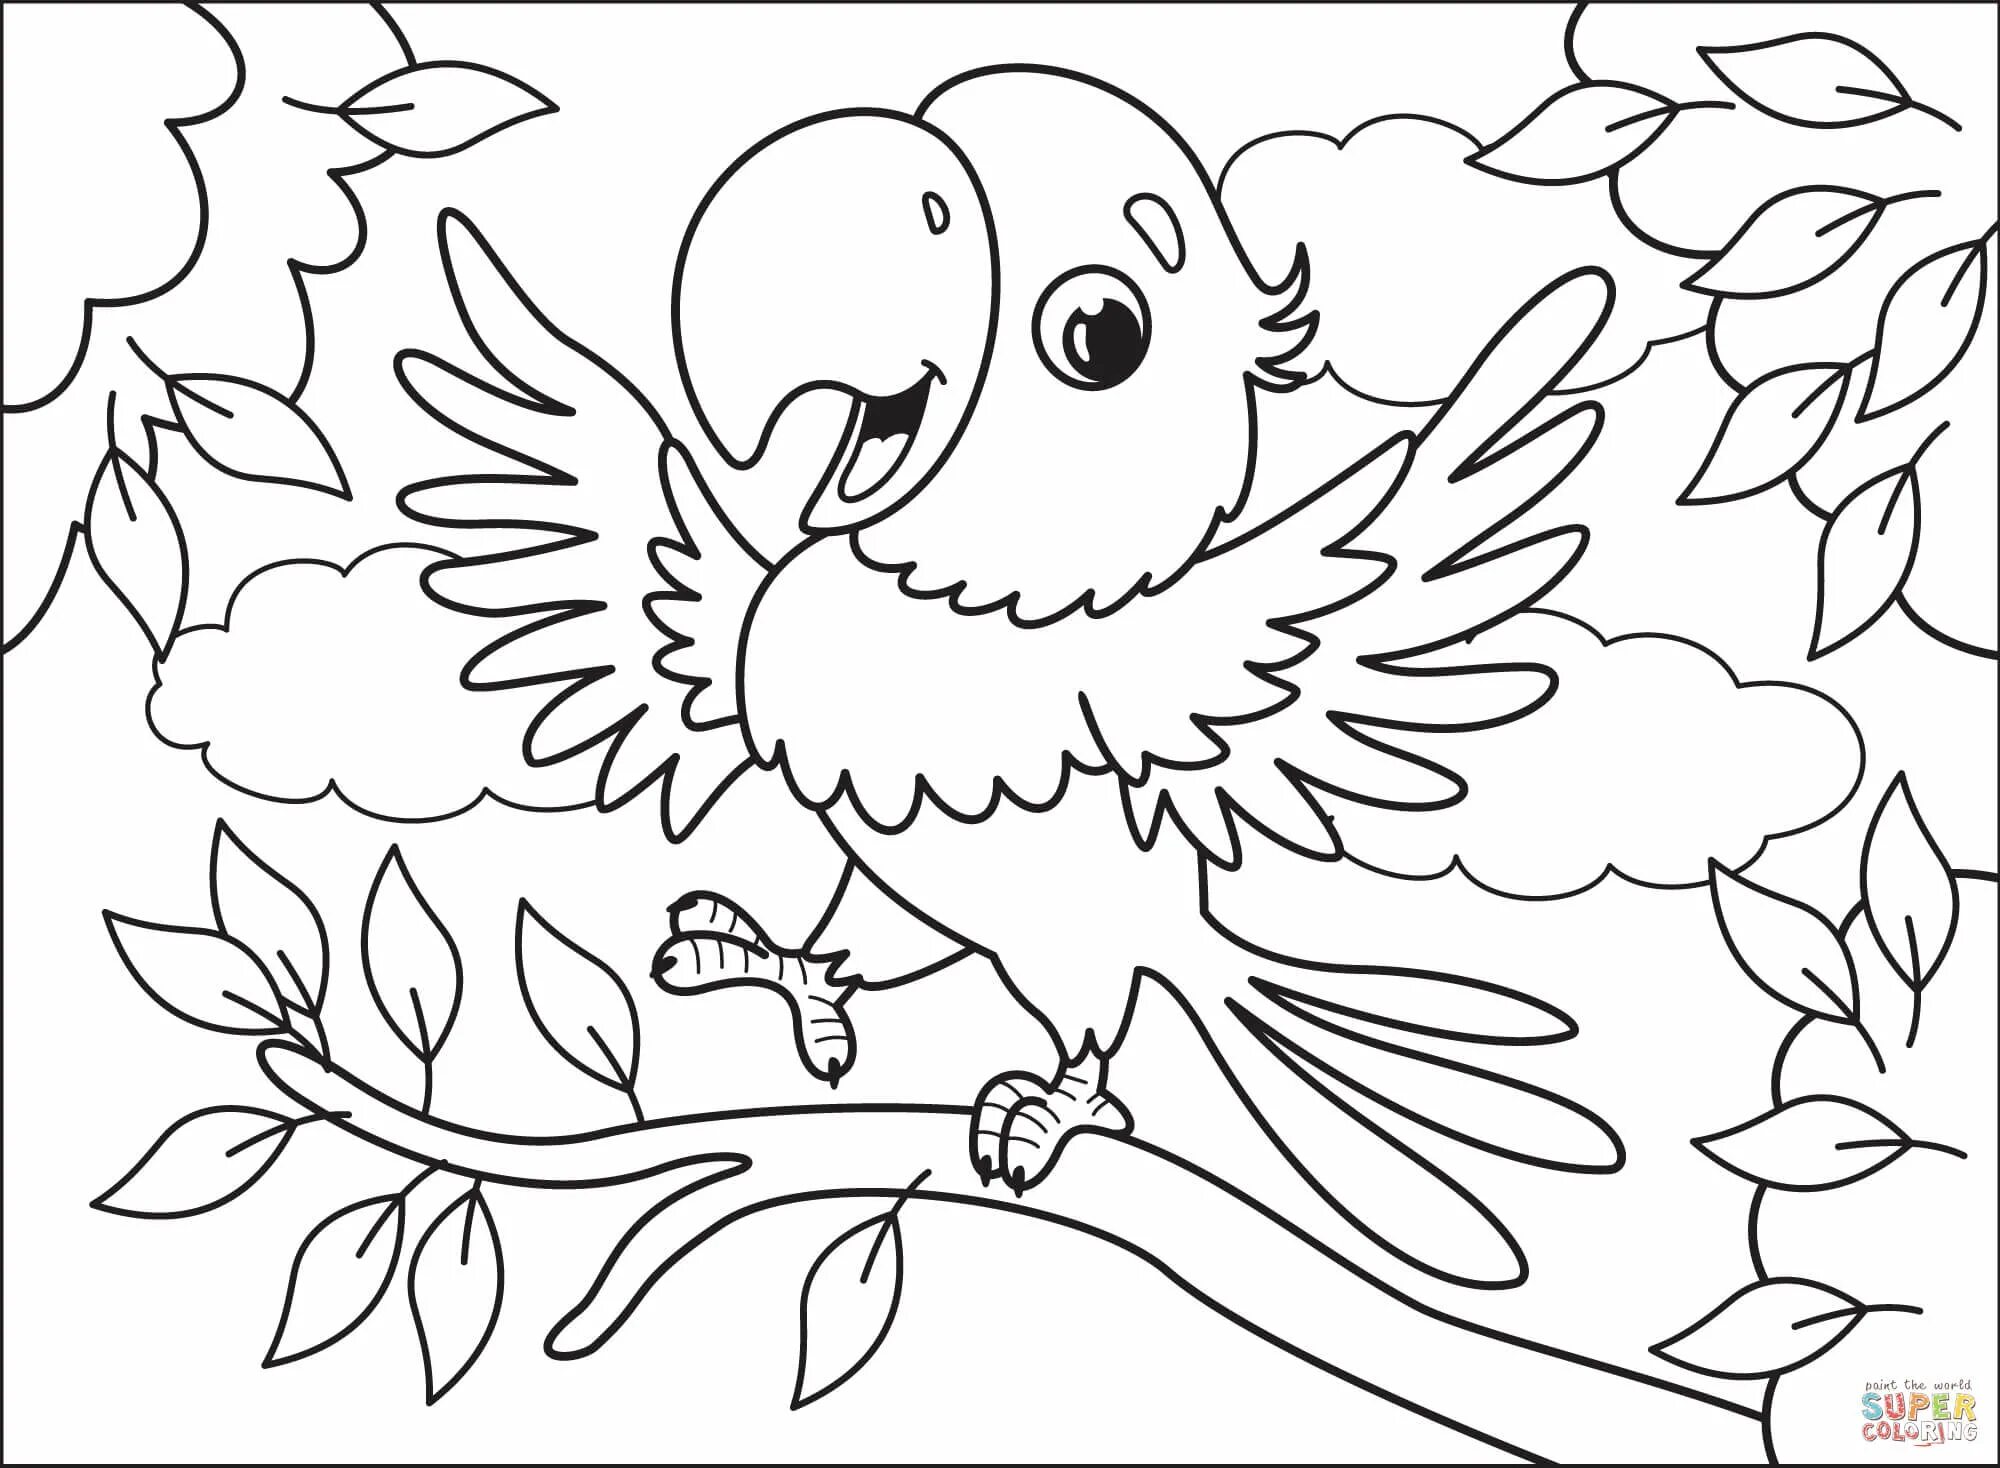 Unforgettable parrot coloring book for children 6-7 years old